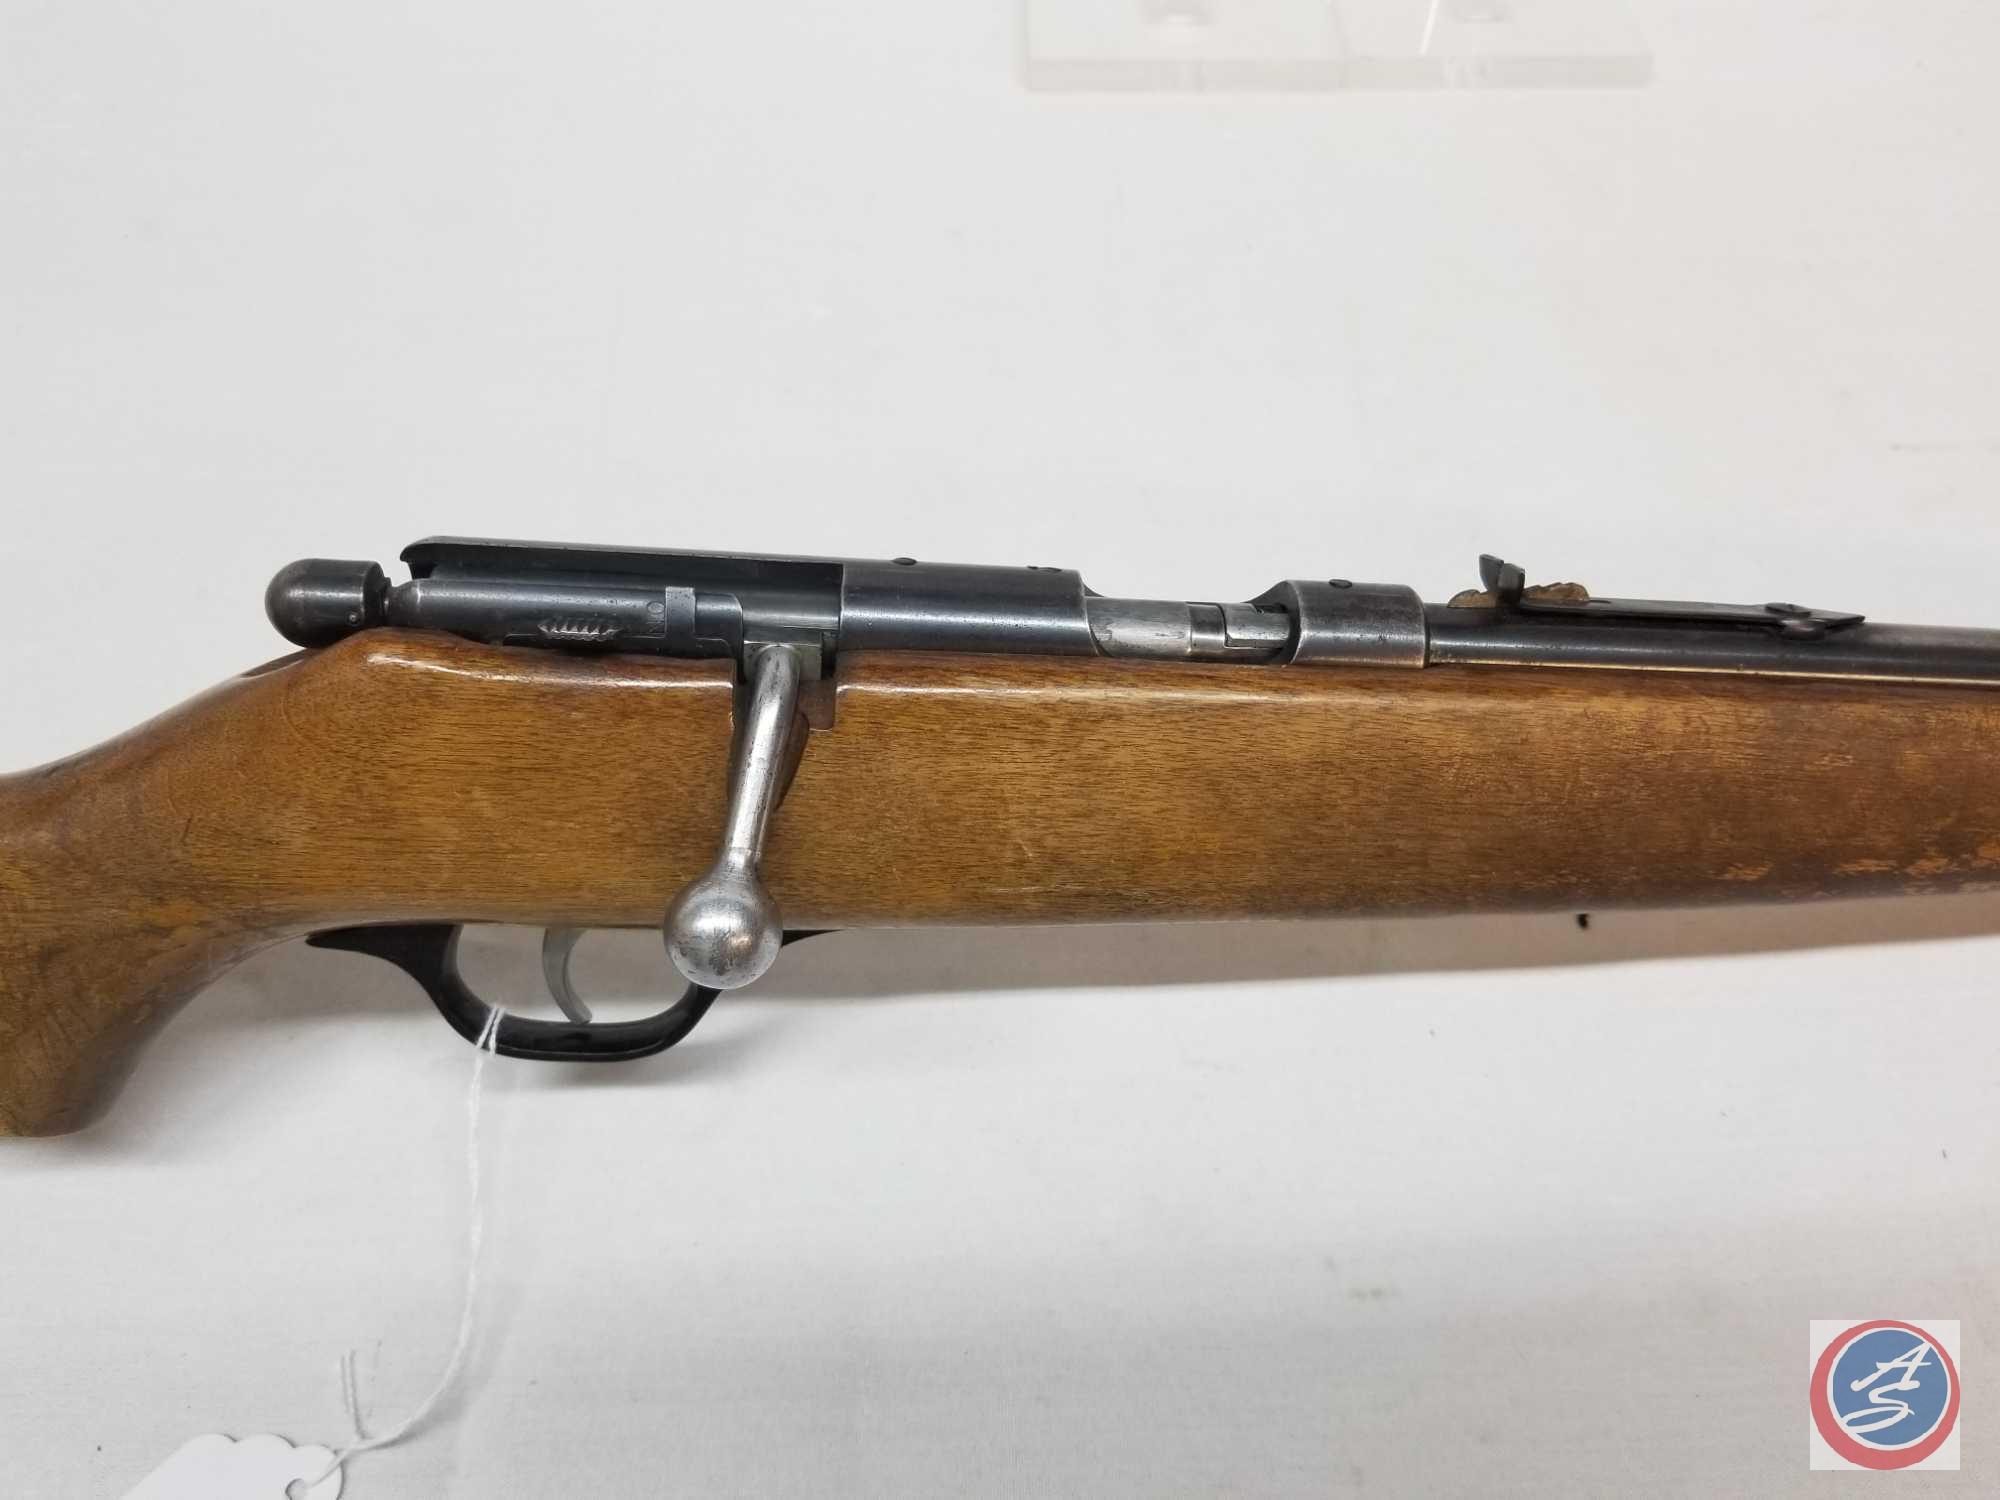 Marlin Model 36RC 22 LR Rifle Rare Vintage Marlin Bolt Action Rifle. Barrel is clearly marked 30-30